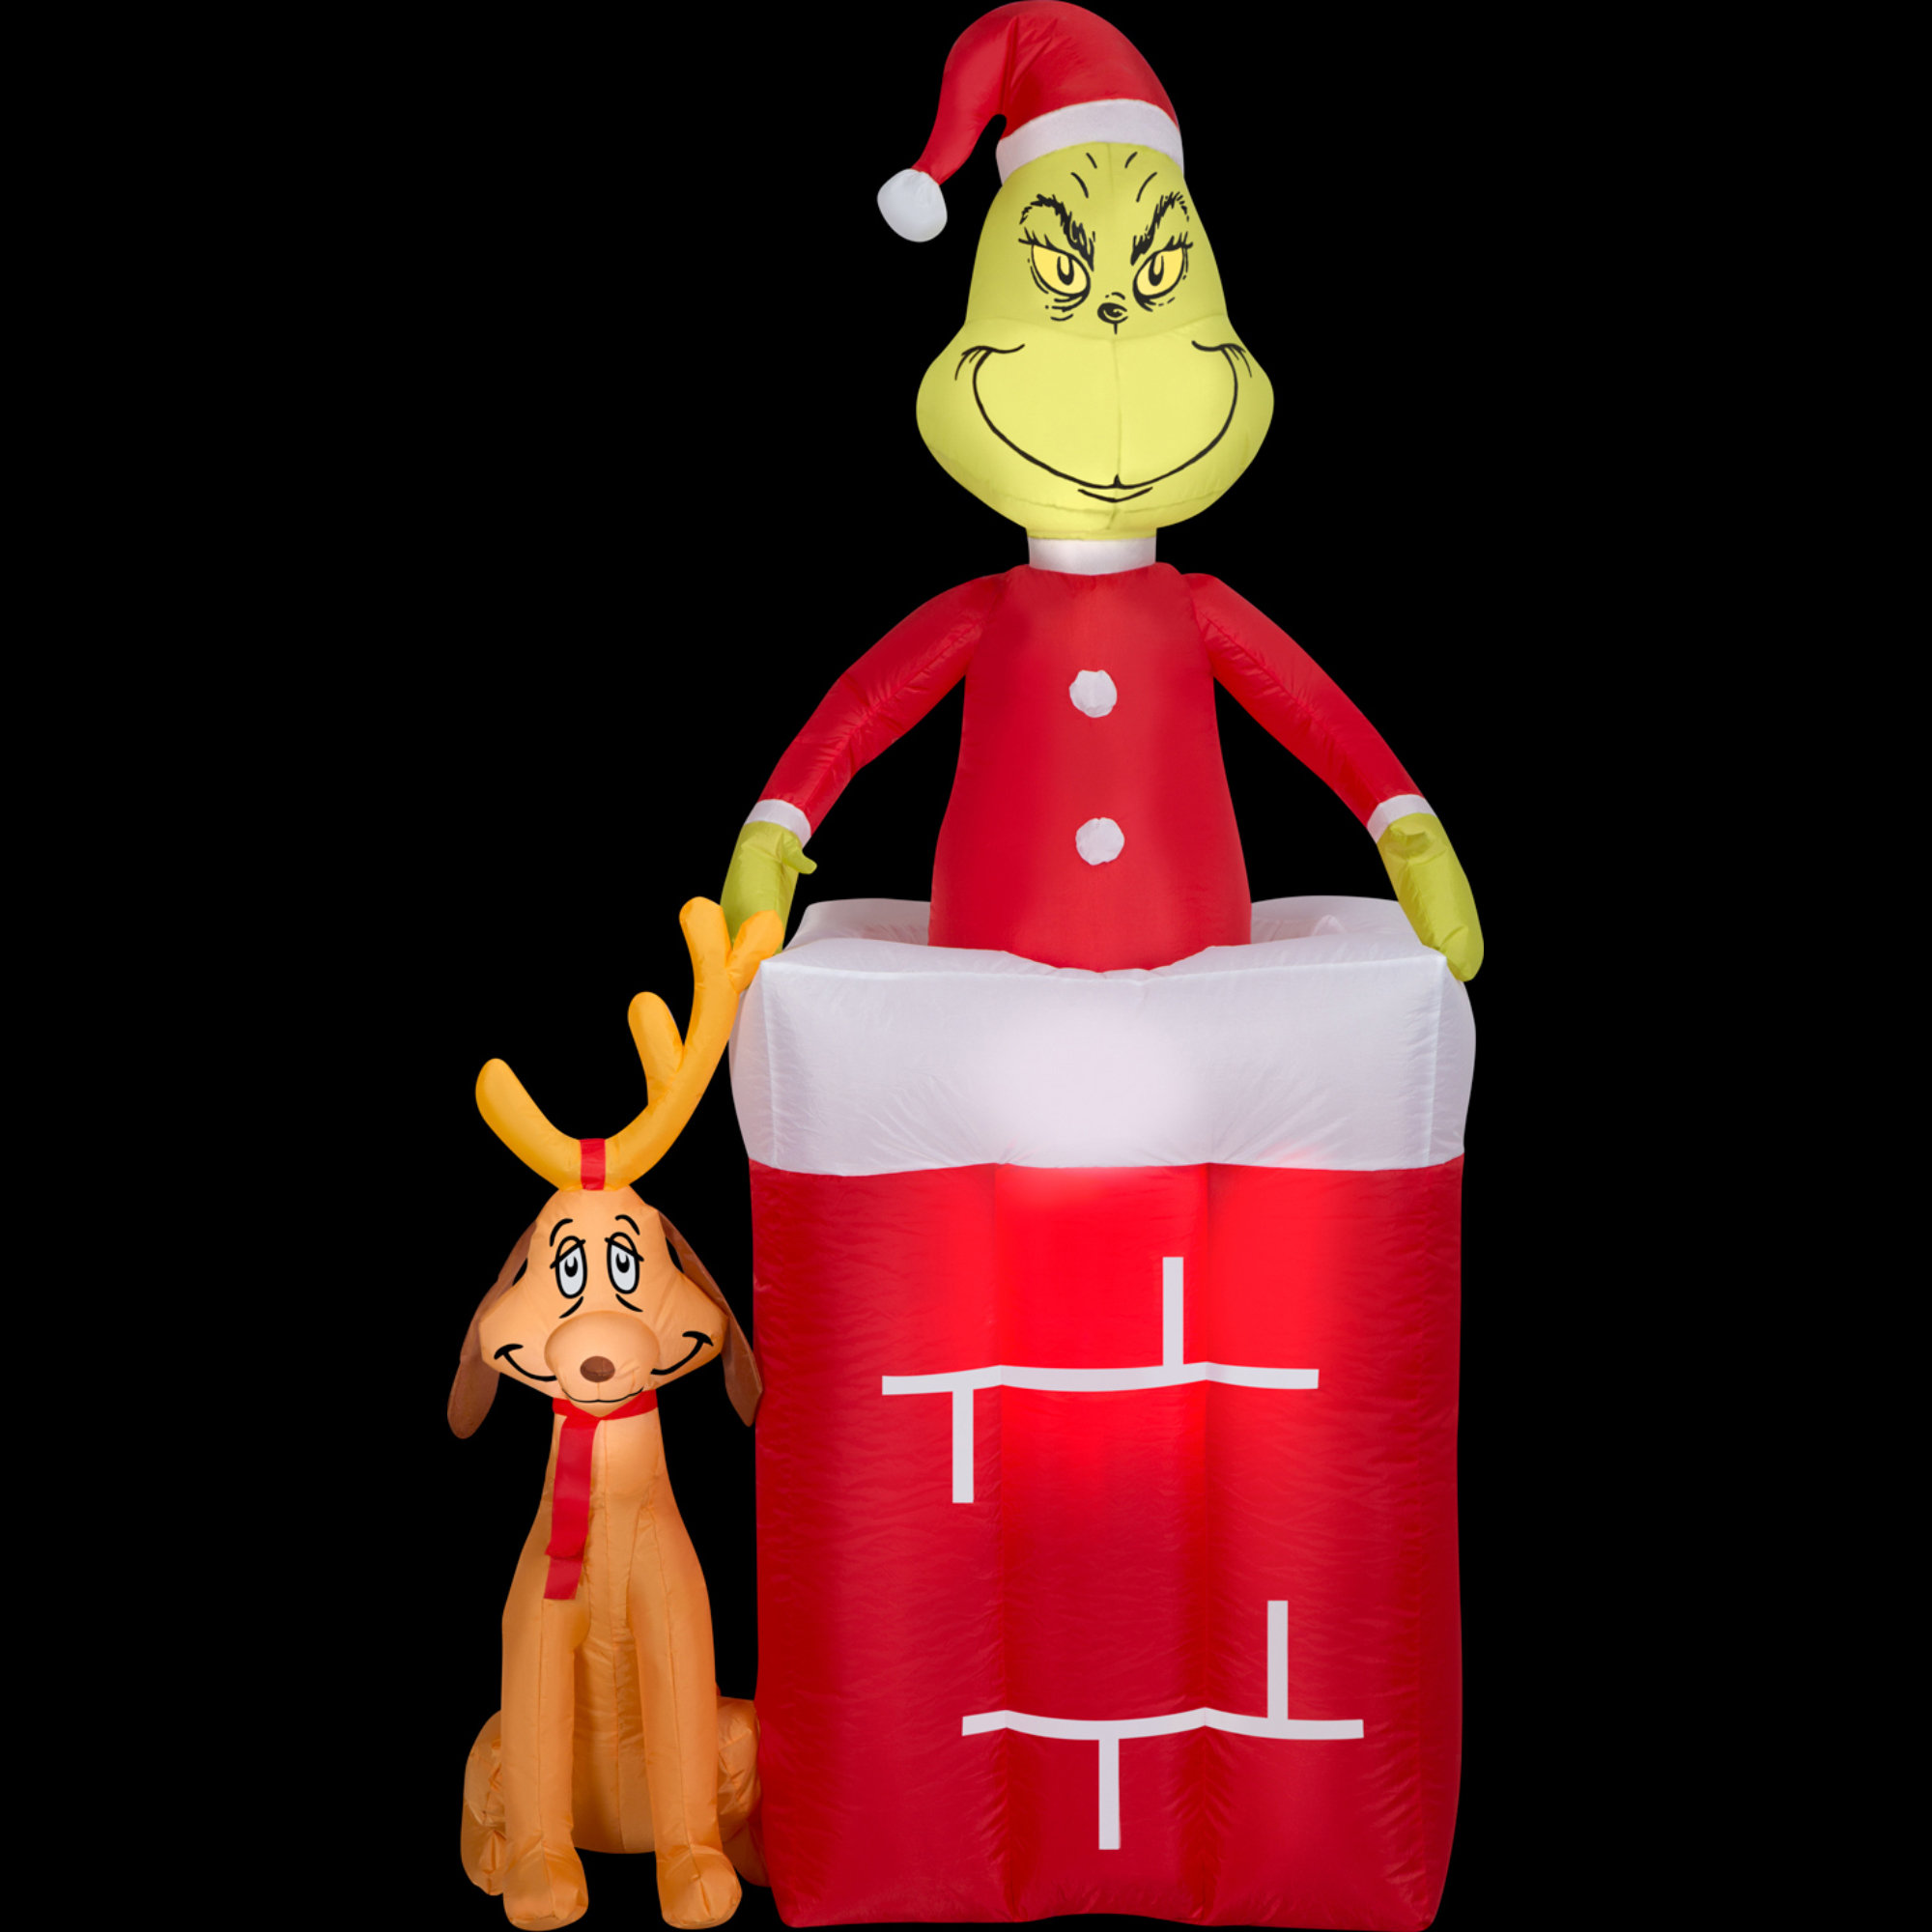 Gemmy 3.5-ft Lighted Dr. Seuss The Grinch Christmas Inflatable at